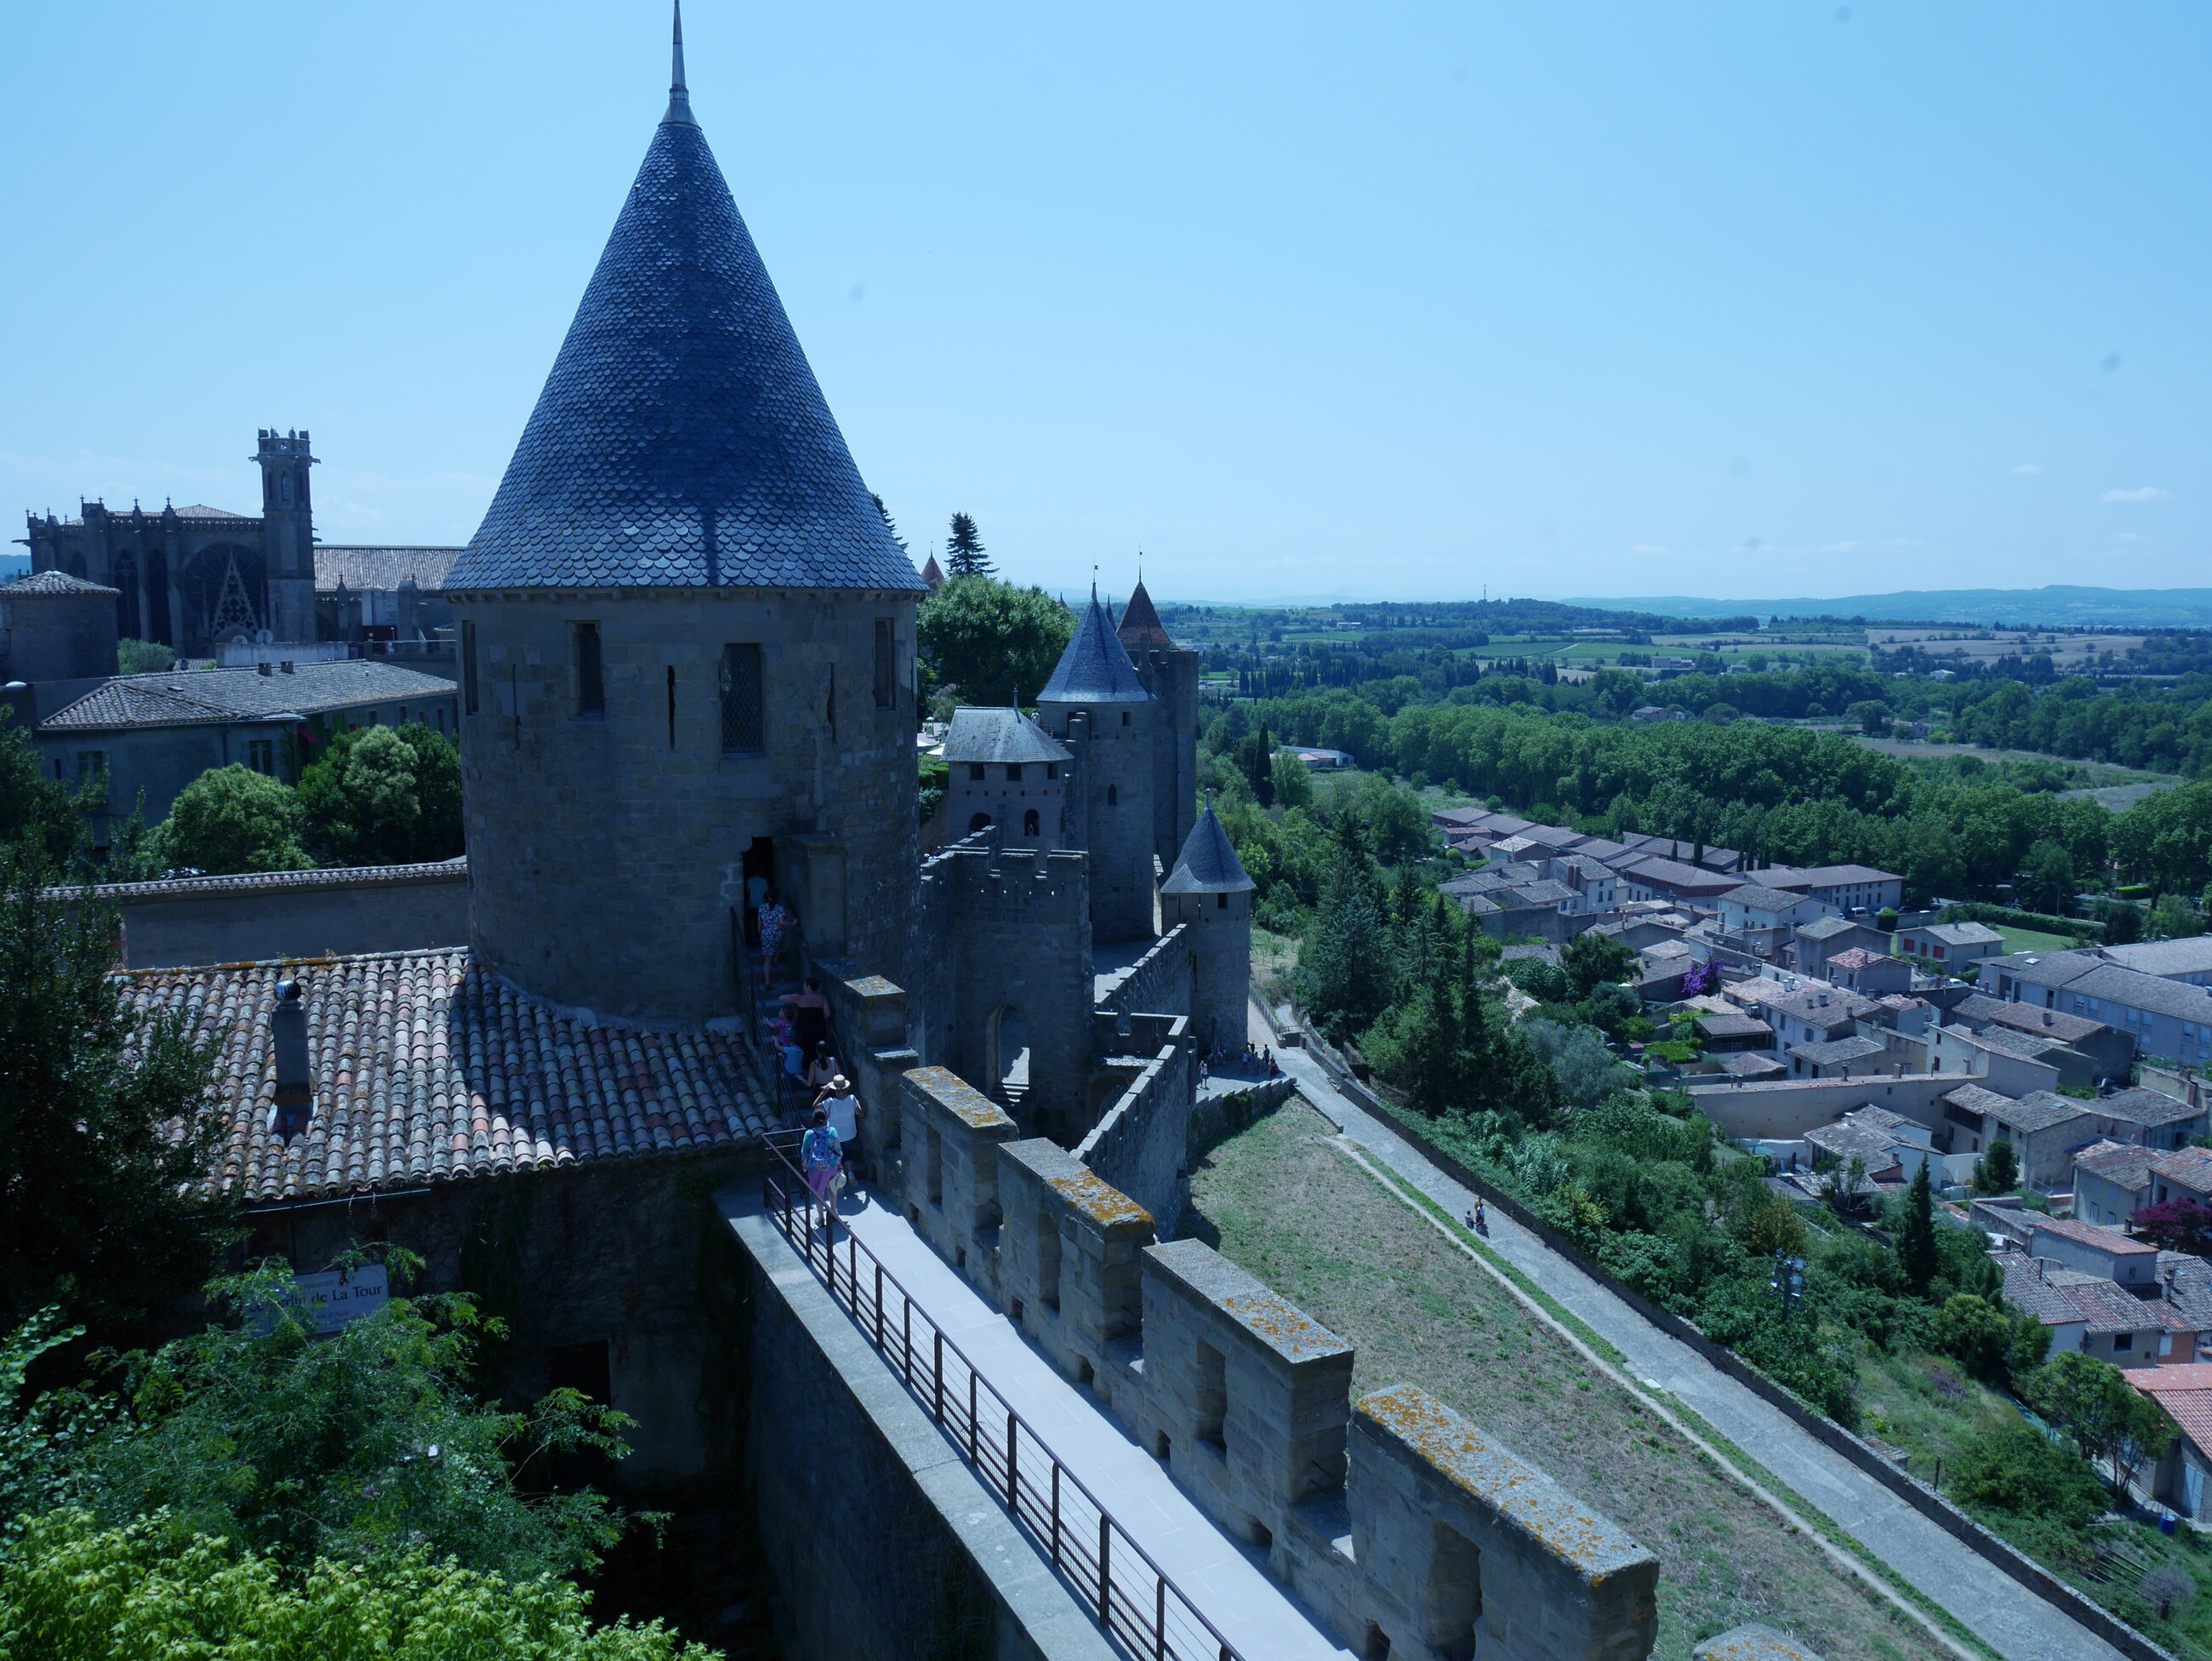 Took this picture on the Carcassone weekend excursion. Carcassonne is a medieval city rich with history, and I loved it so much!